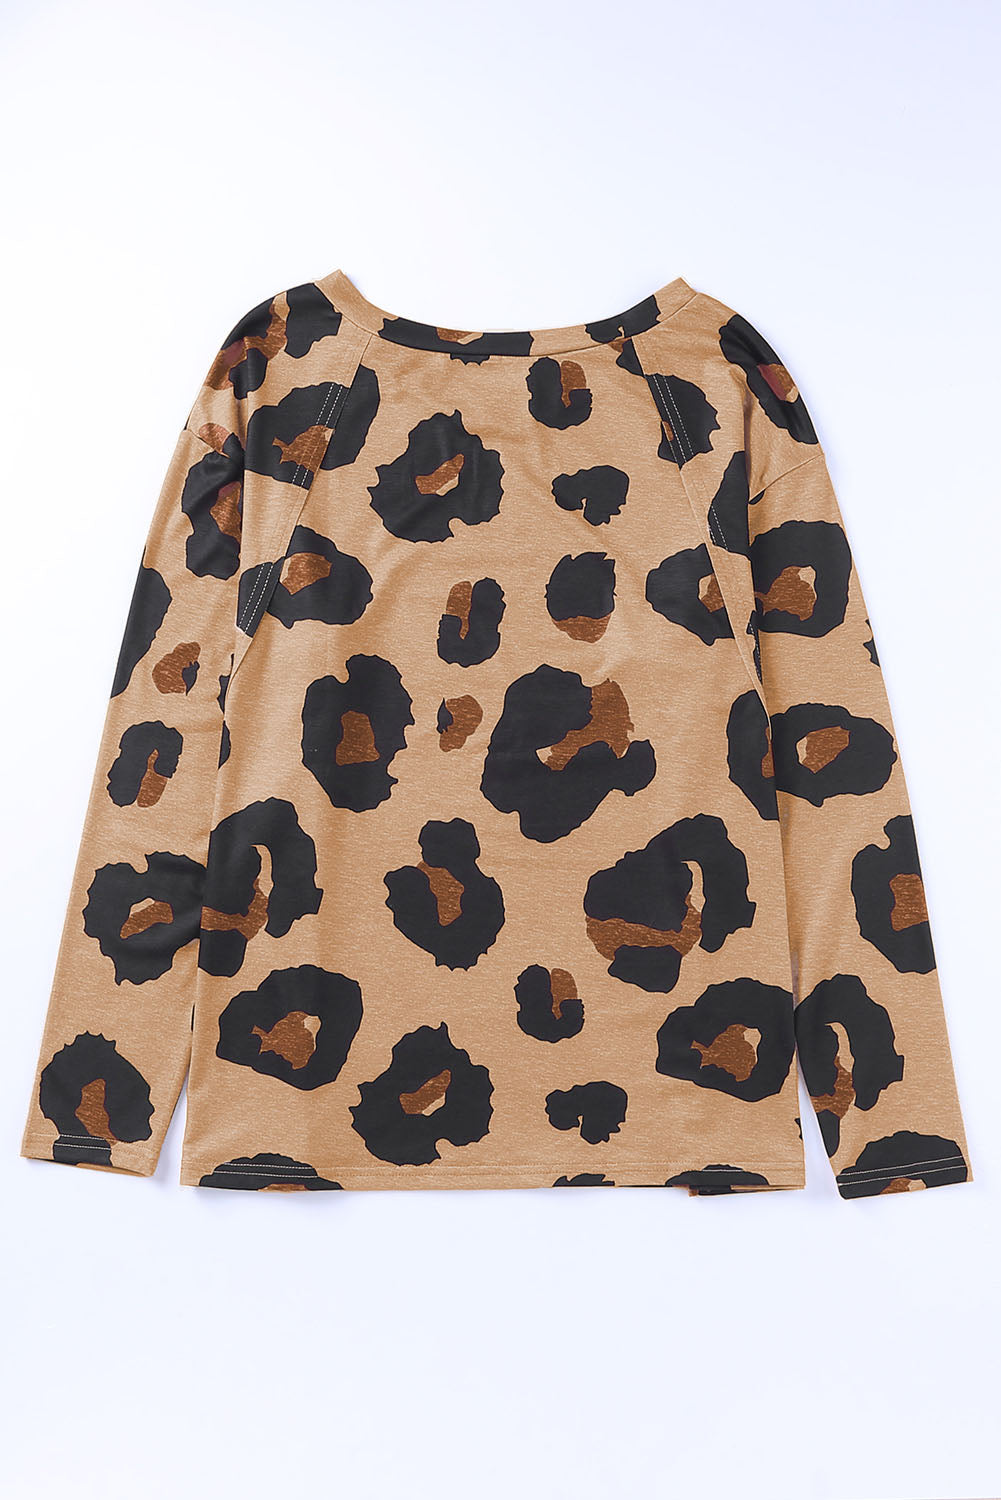 Full Size Leopard Print Round Neck Long Sleeve Tee Print on any thing USA/STOD clothes